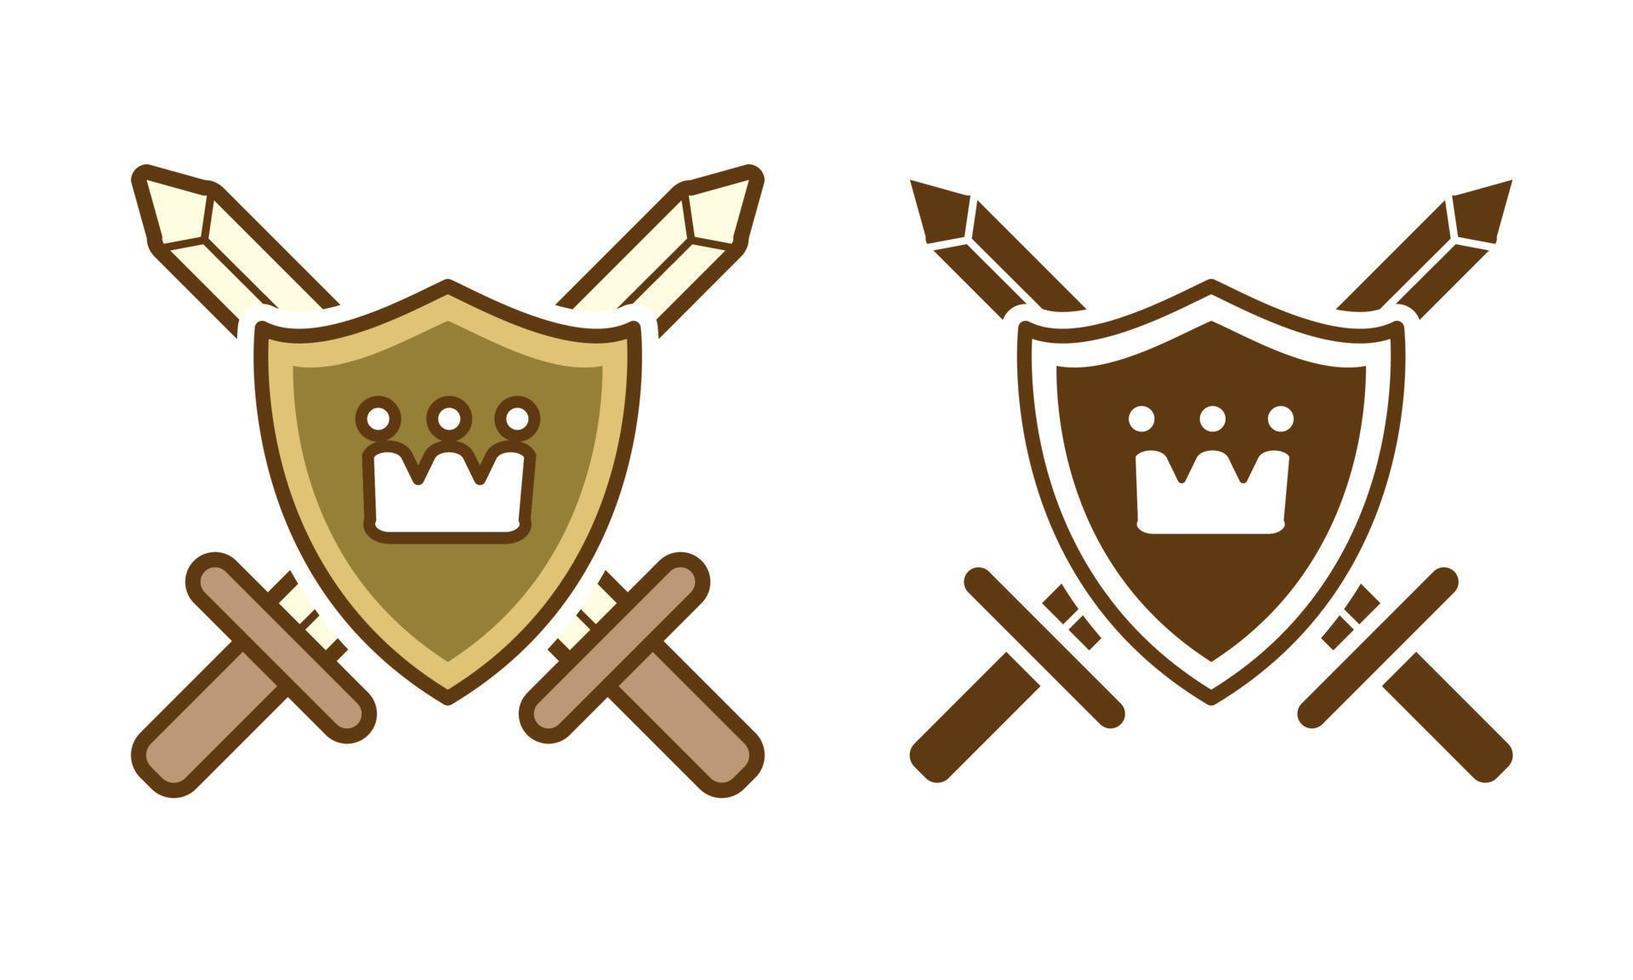 Kingdom Crown on Shield with Swords Sign vector